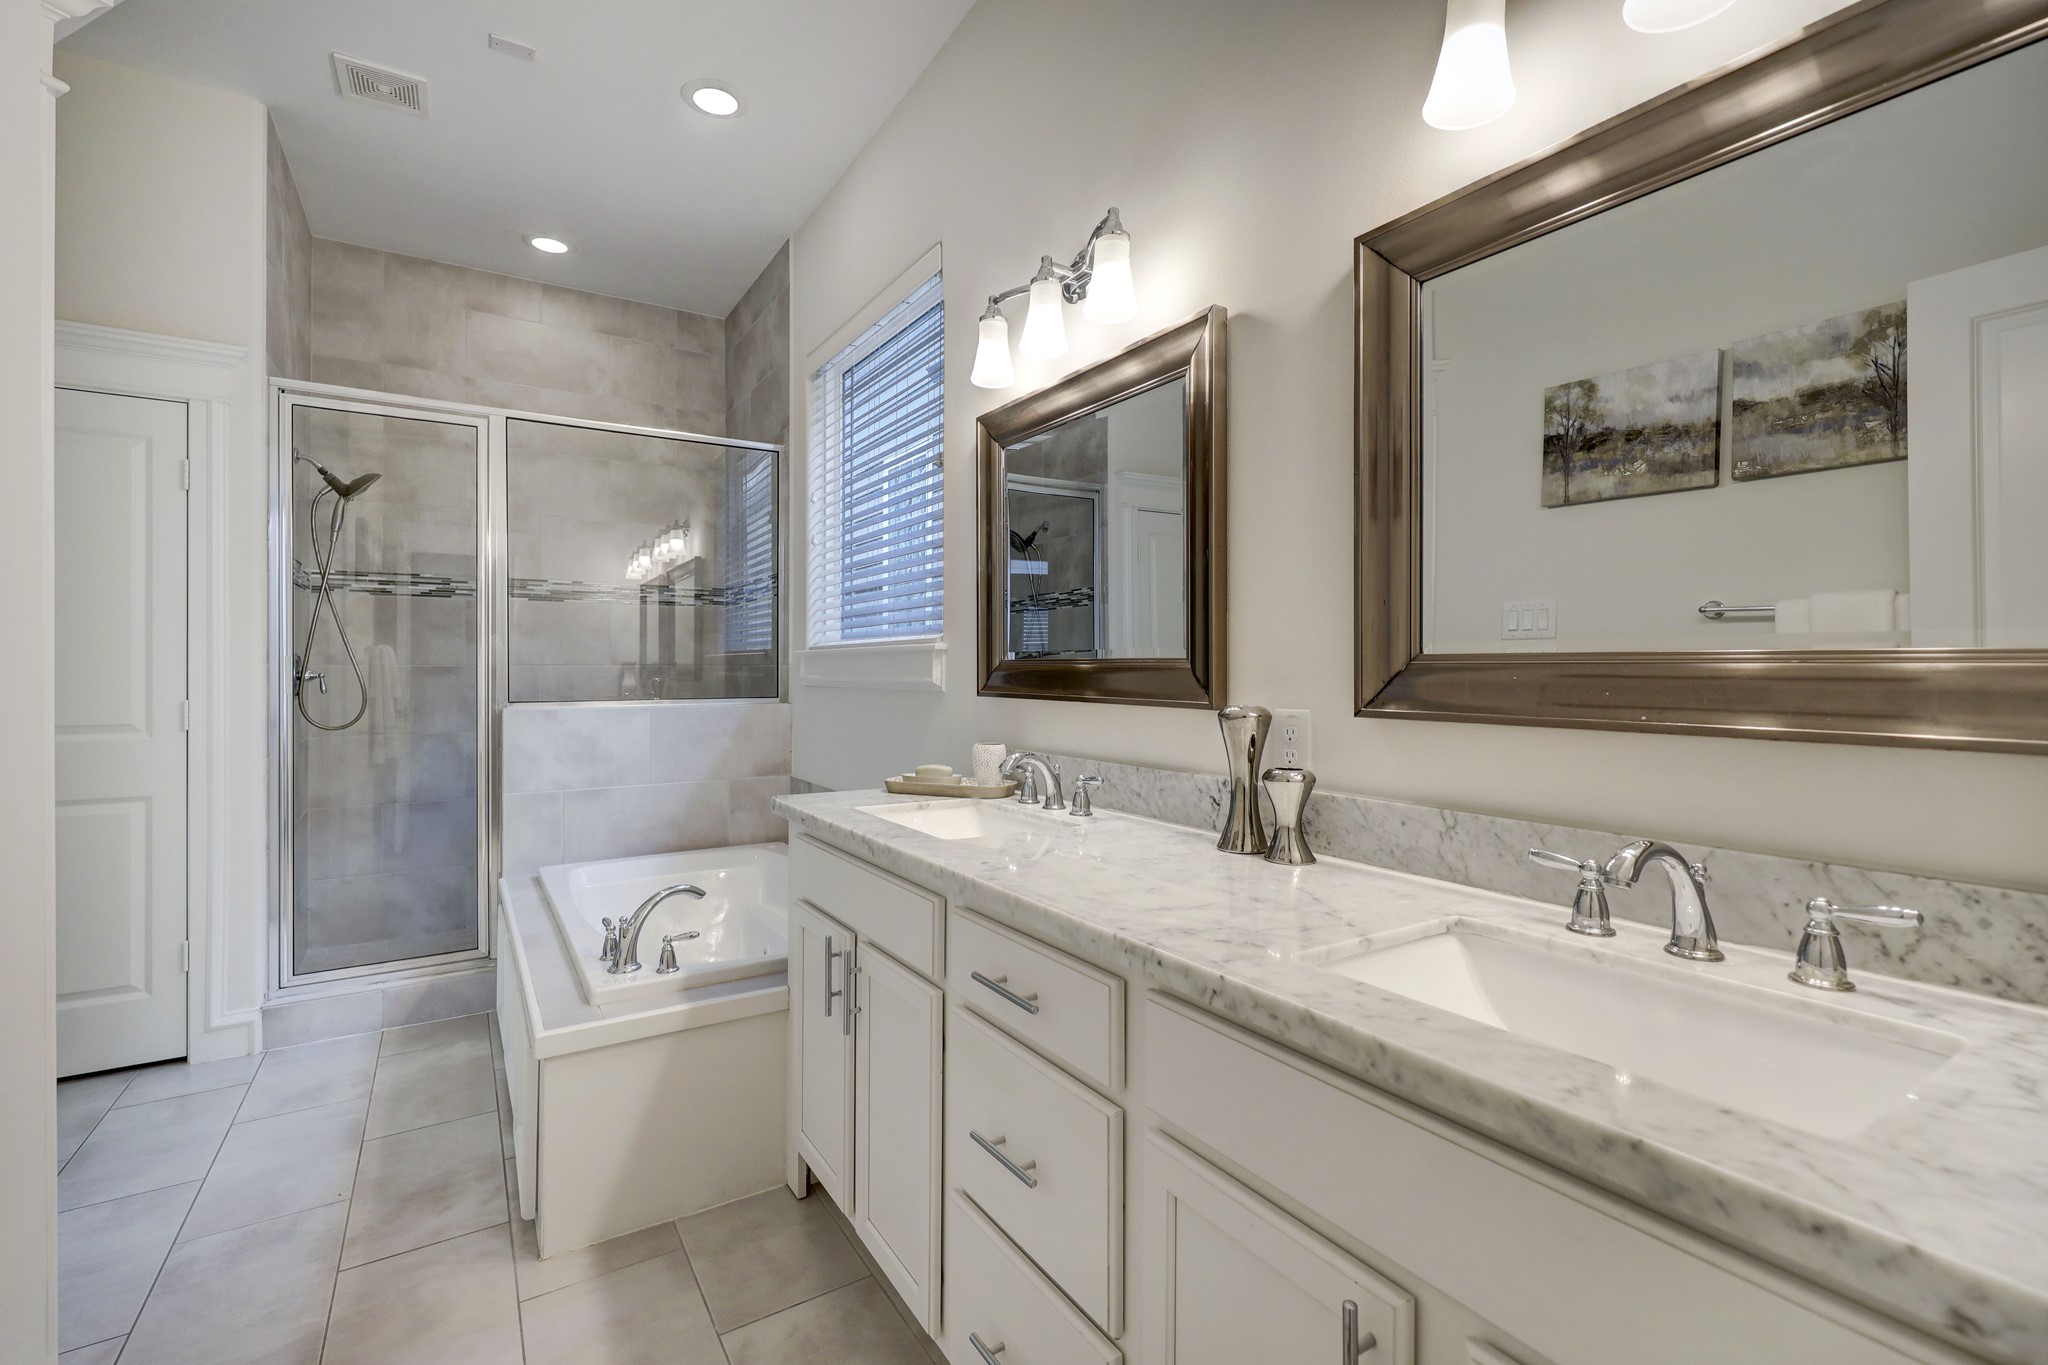 Framed mirrors, elegant lighting, and chrome hardware lend a luxurious feel to the glass-enclosed shower.